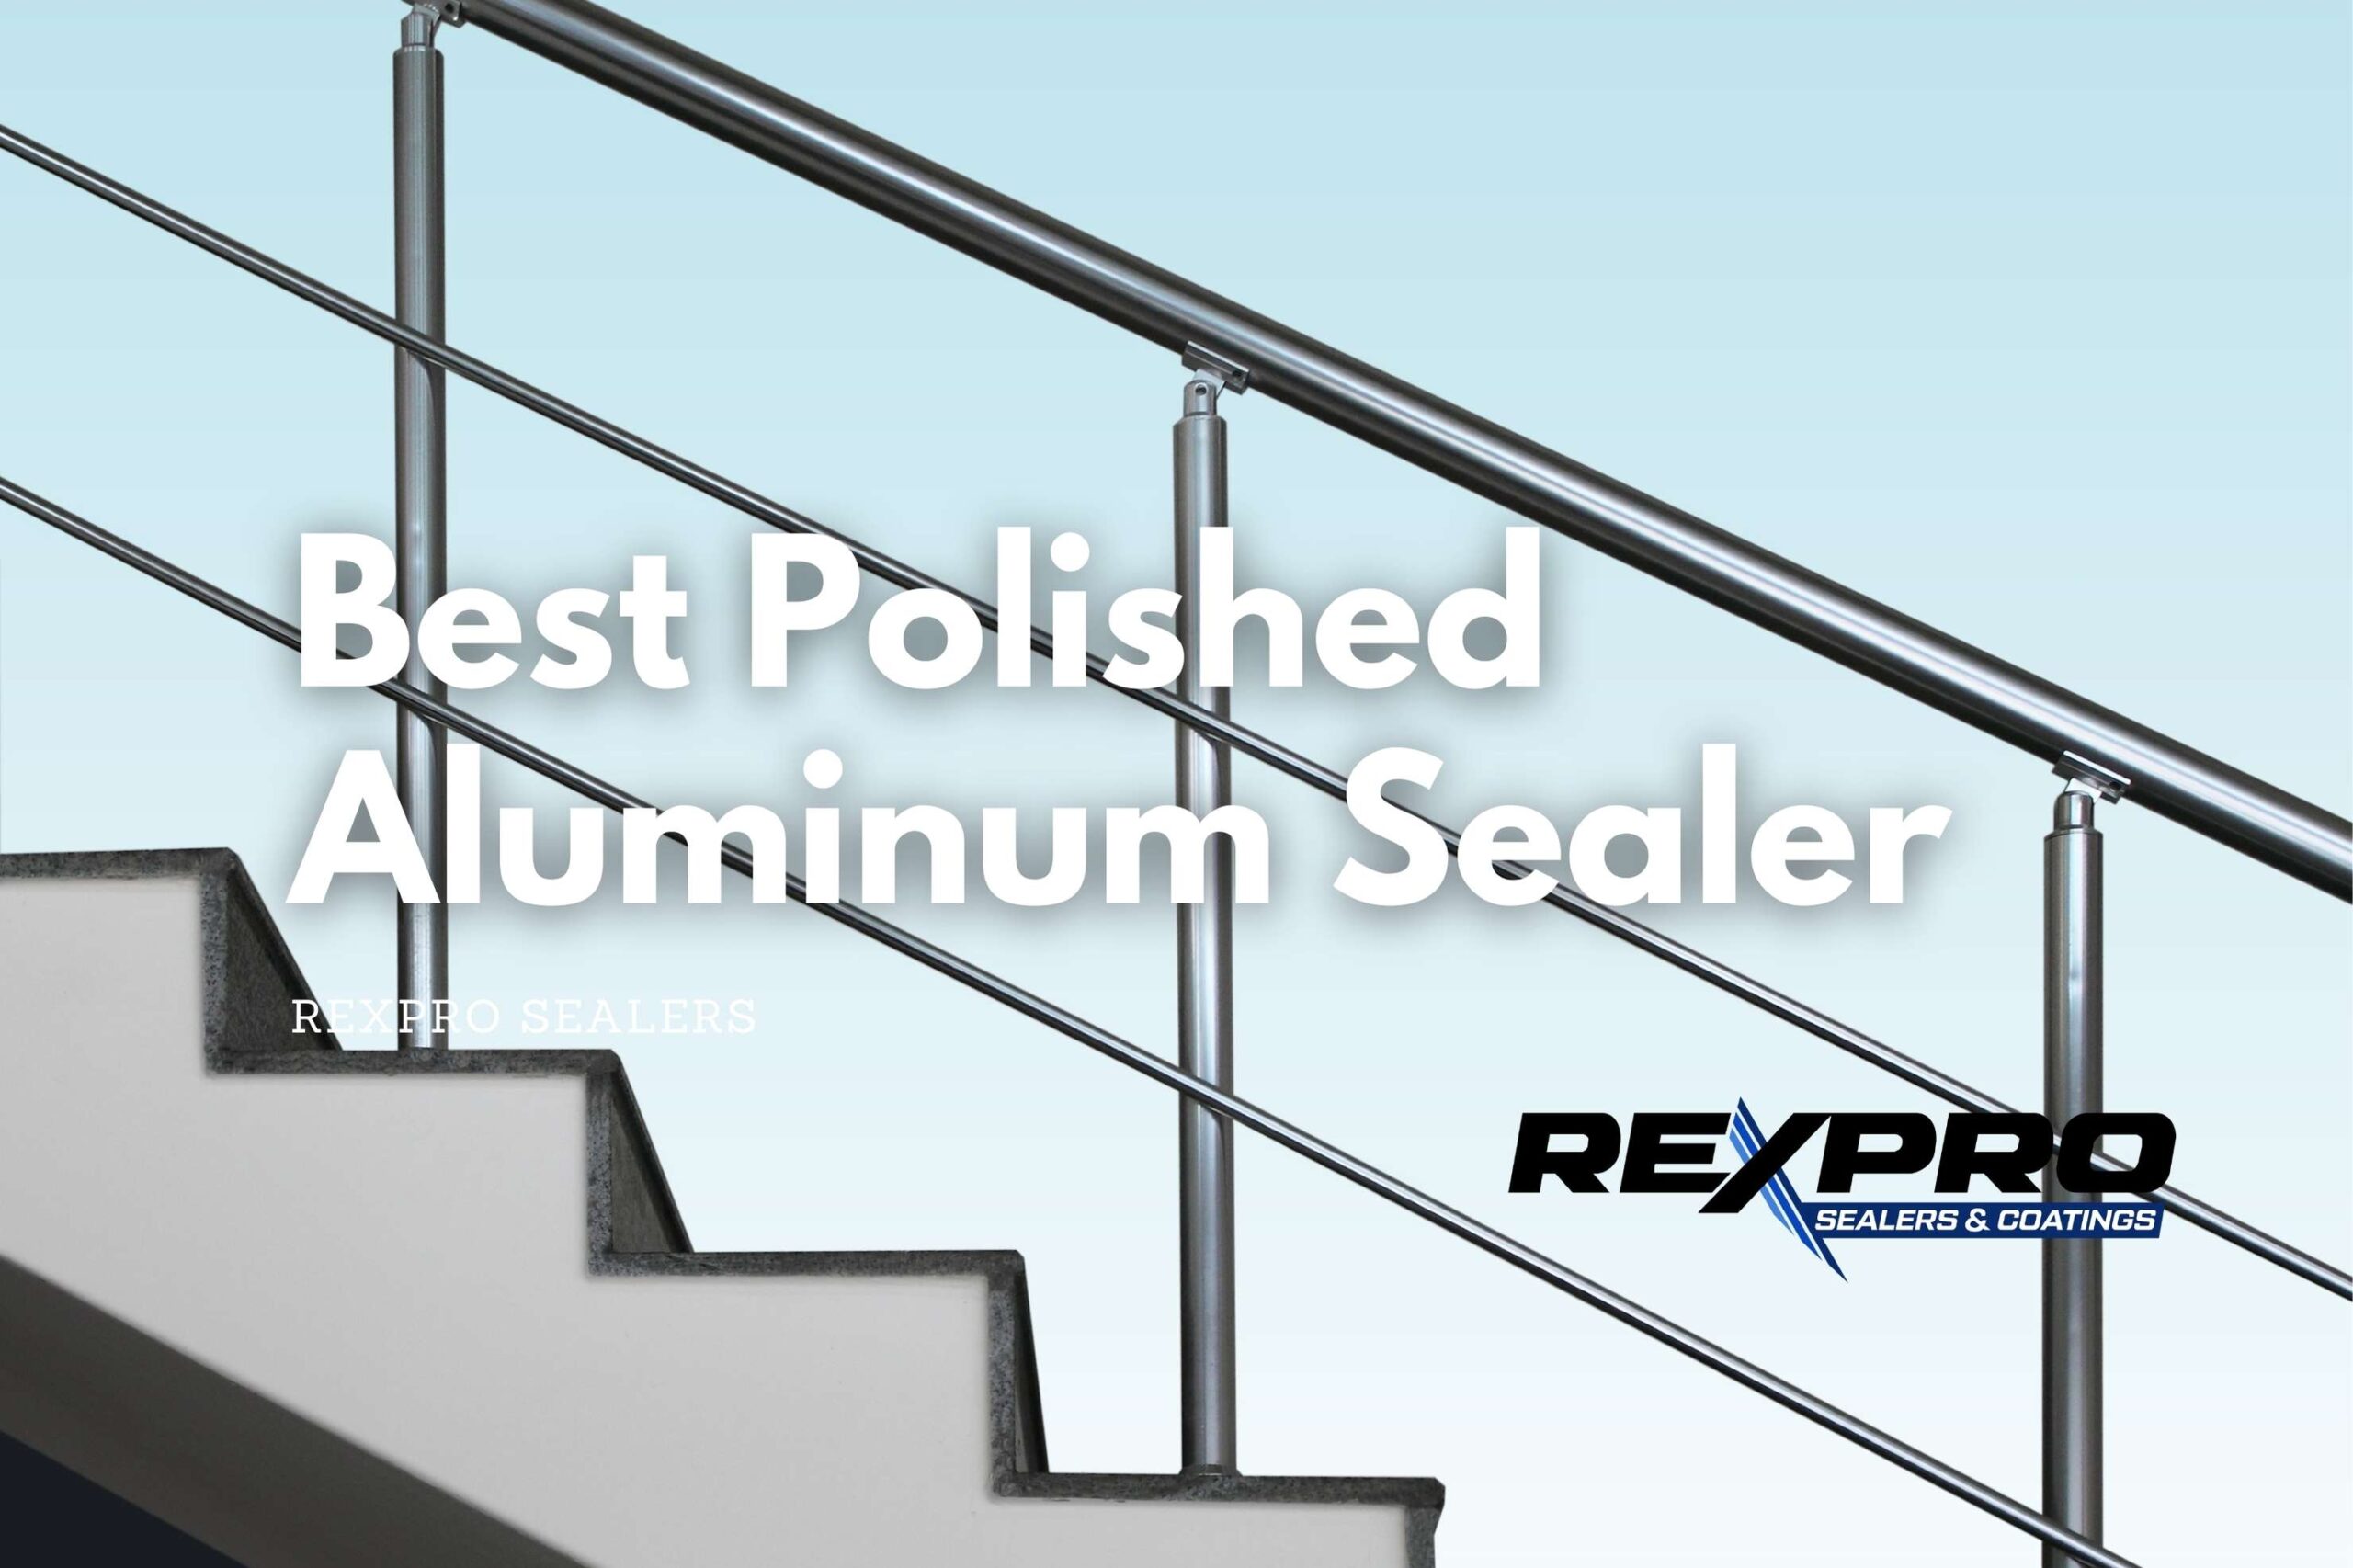 Looking-for-a-polished-aluminum-sealer-for-sealing-your-polished-aluminum